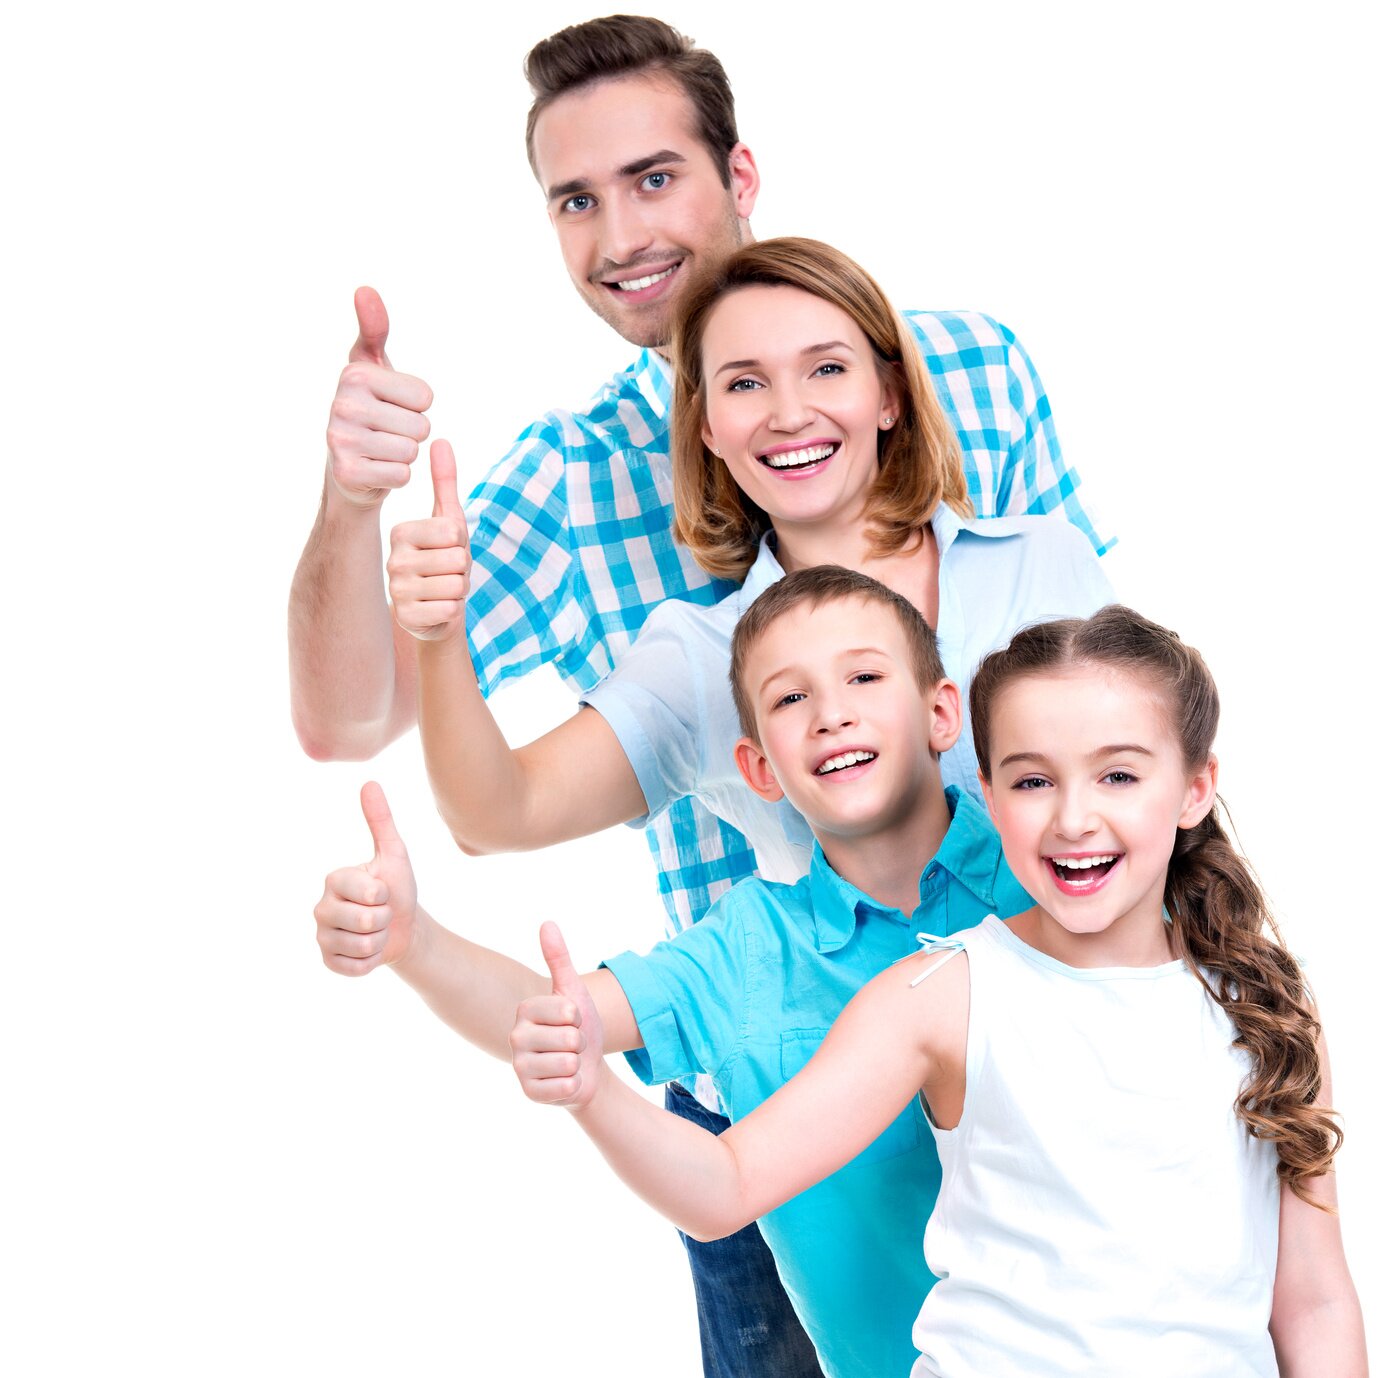 happy european family with children shows the thumbs up sign